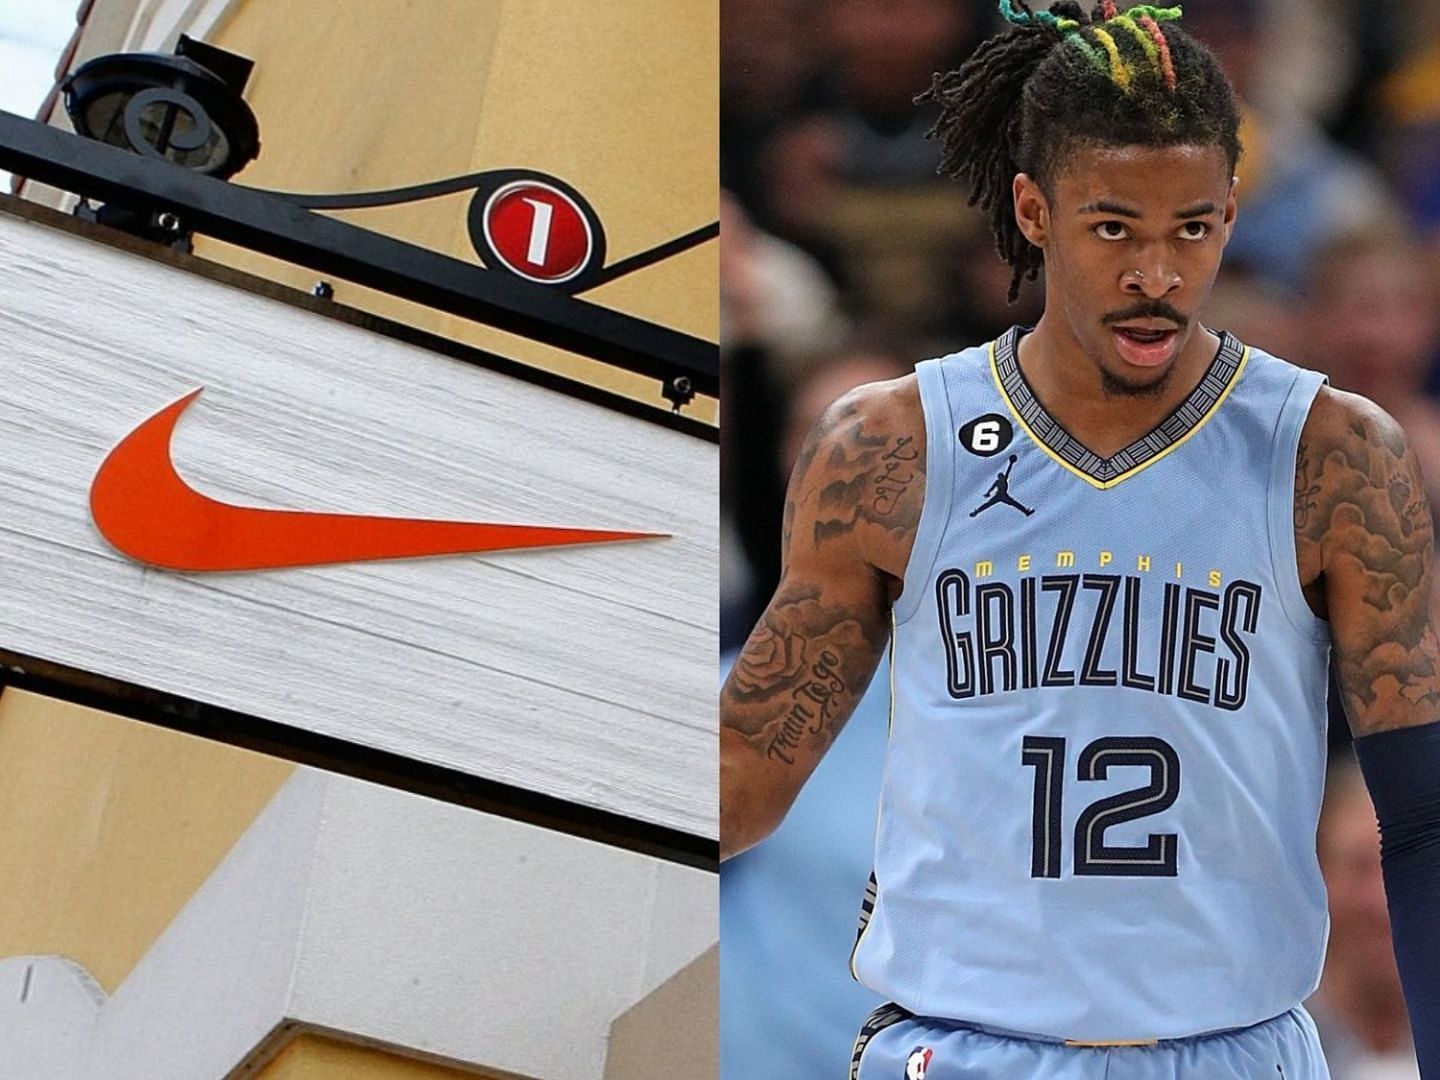 Nike reportedly planning to ditch NBA sleeved jerseys next season